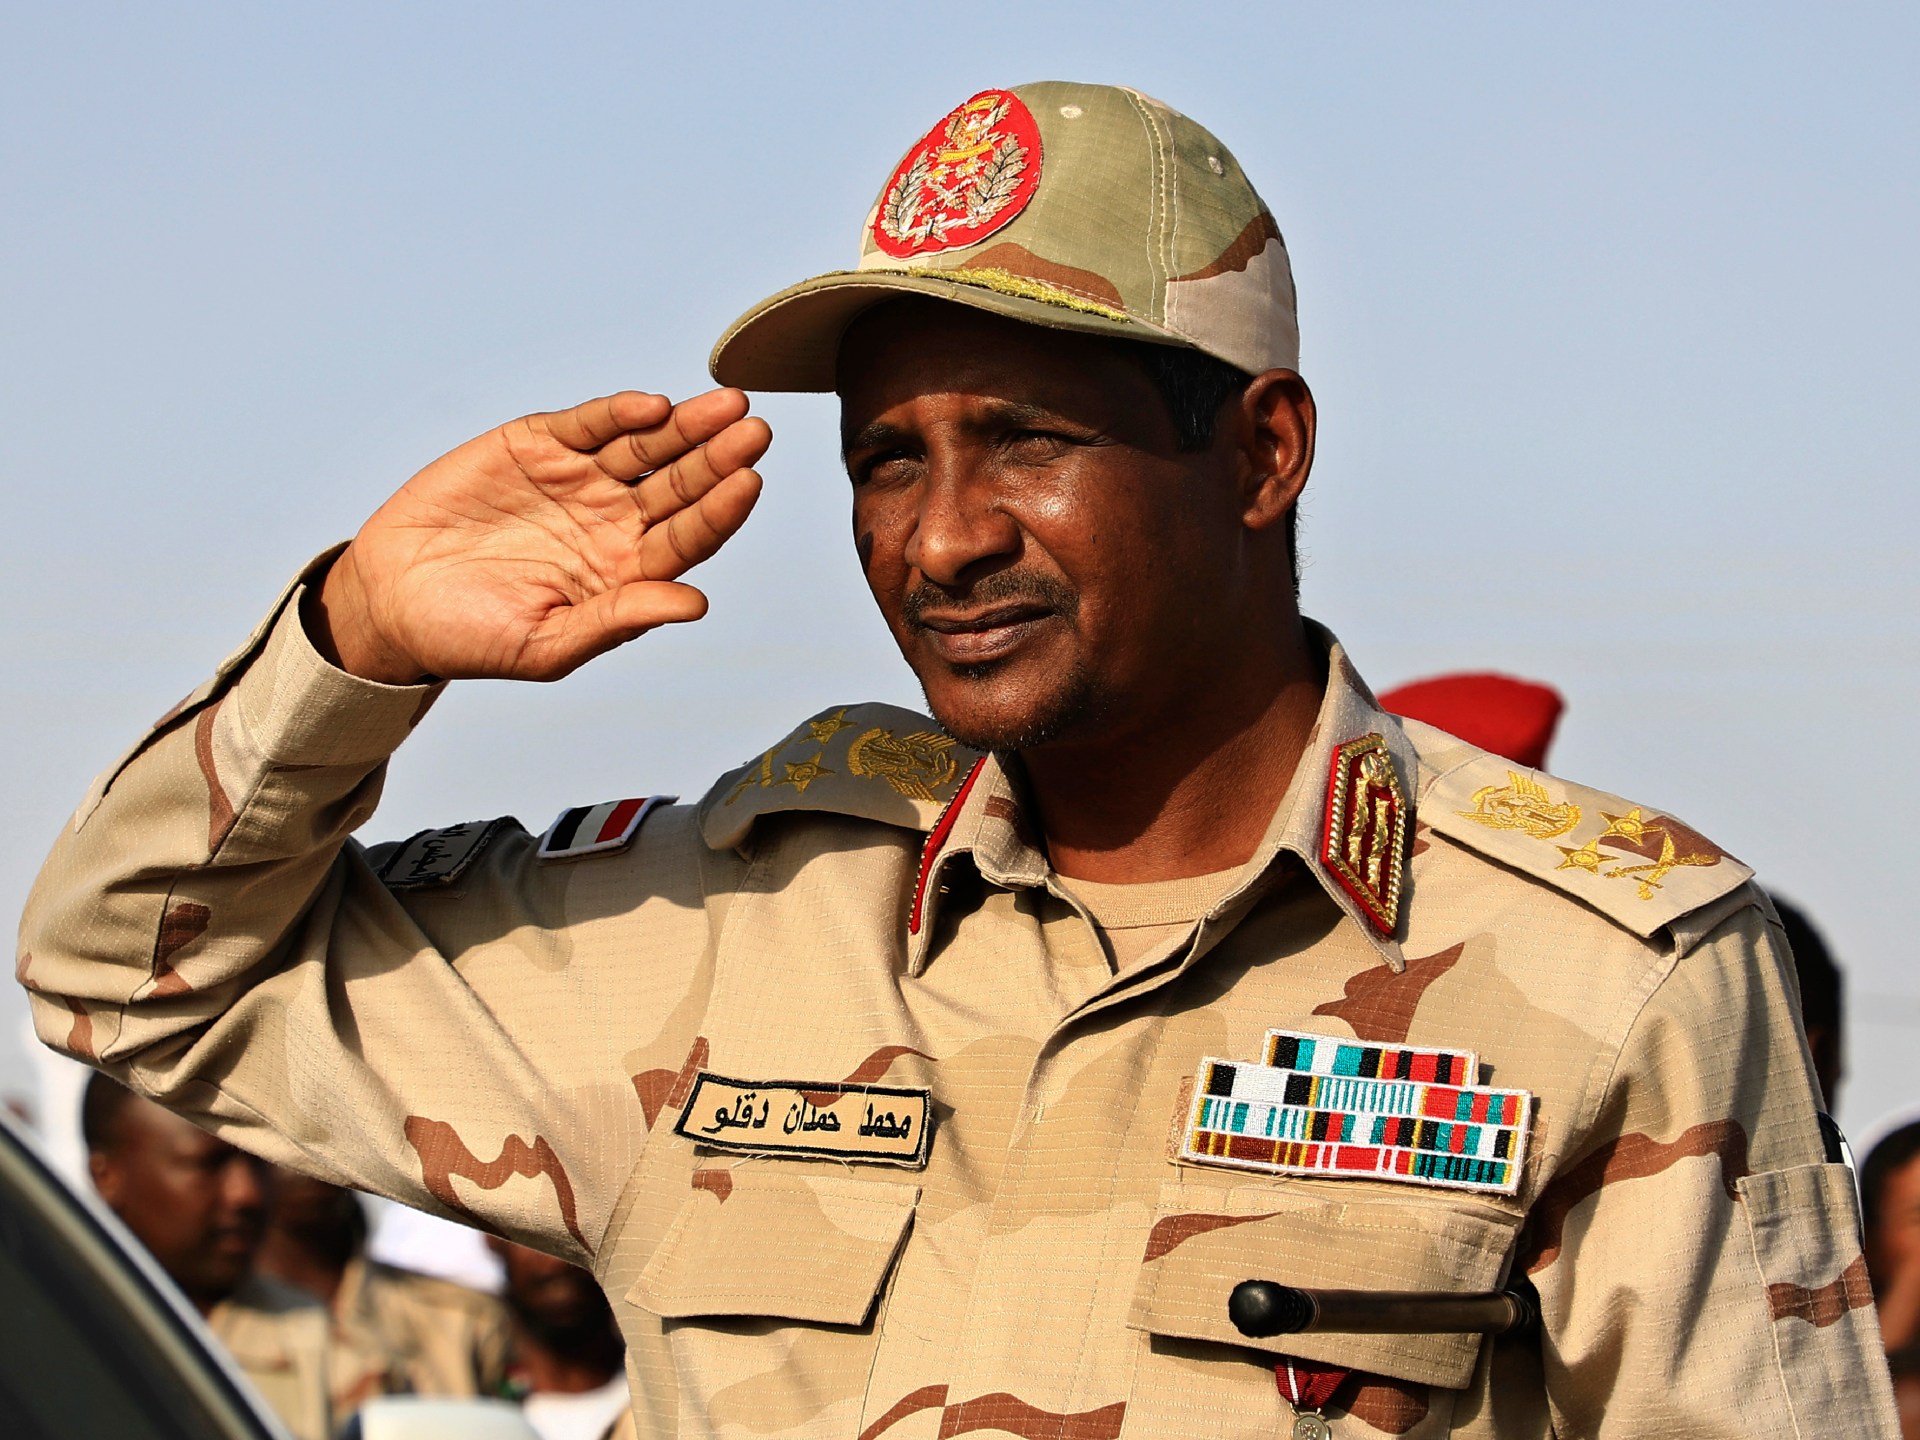 Sudan’s feared paramilitary leader signals ambition to rule the country | News